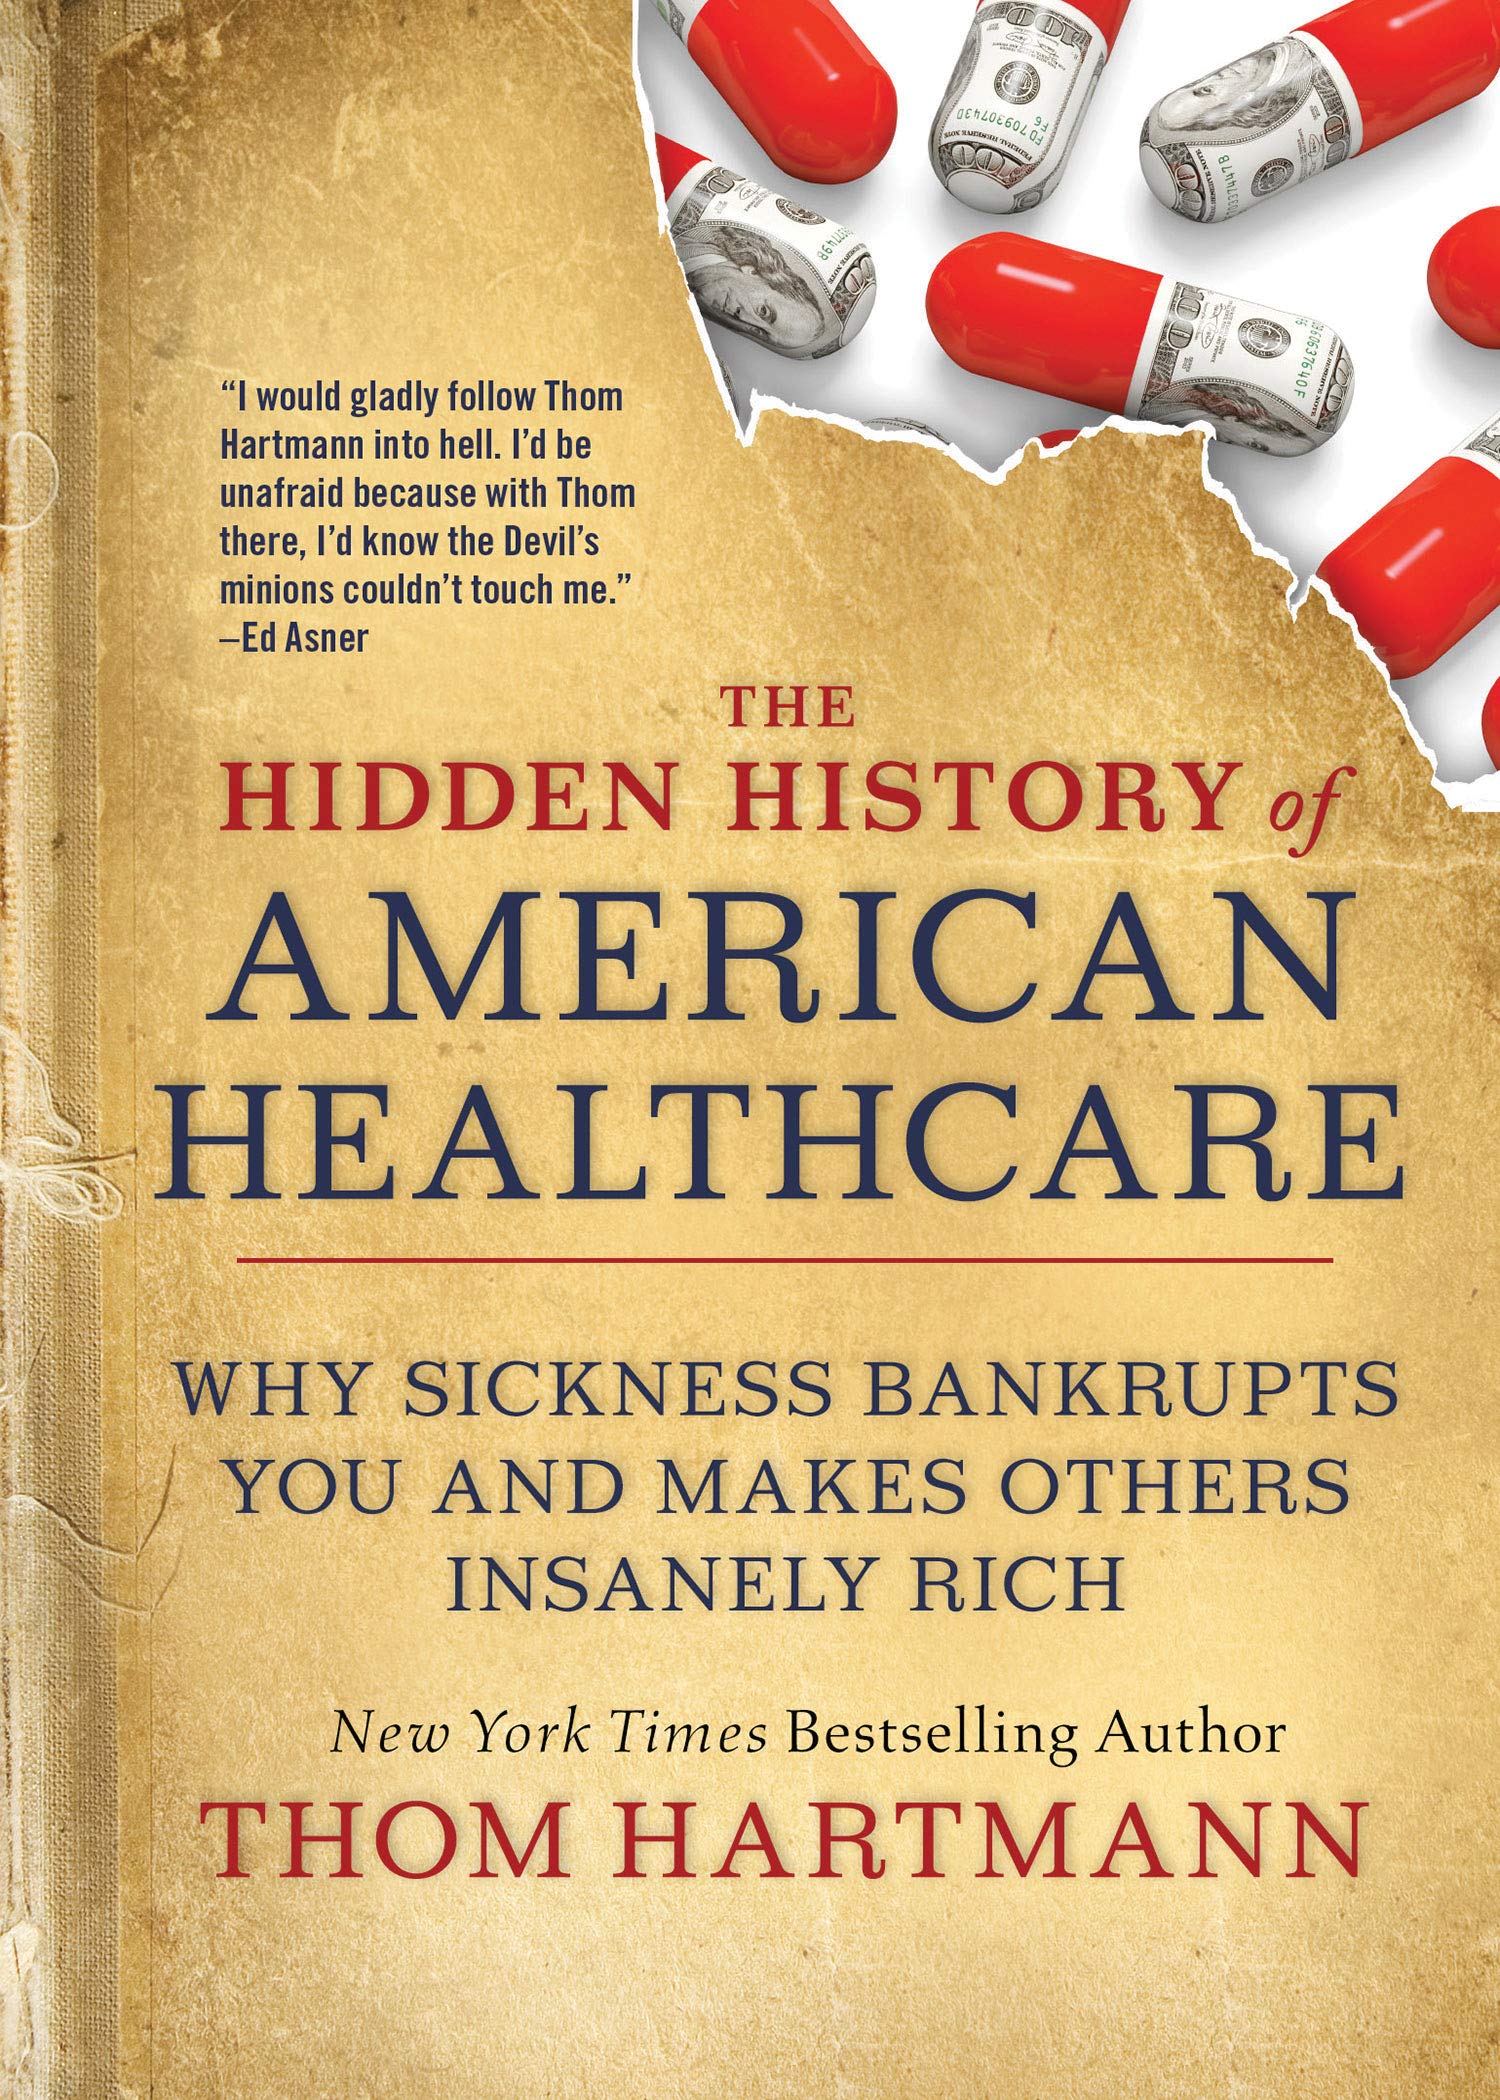 The Hidden History of American Healthcare: Why Sickness Bankrupts You and Makes Others Insanely Rich (The Thom Hartmann Hidden History Series Book 6)